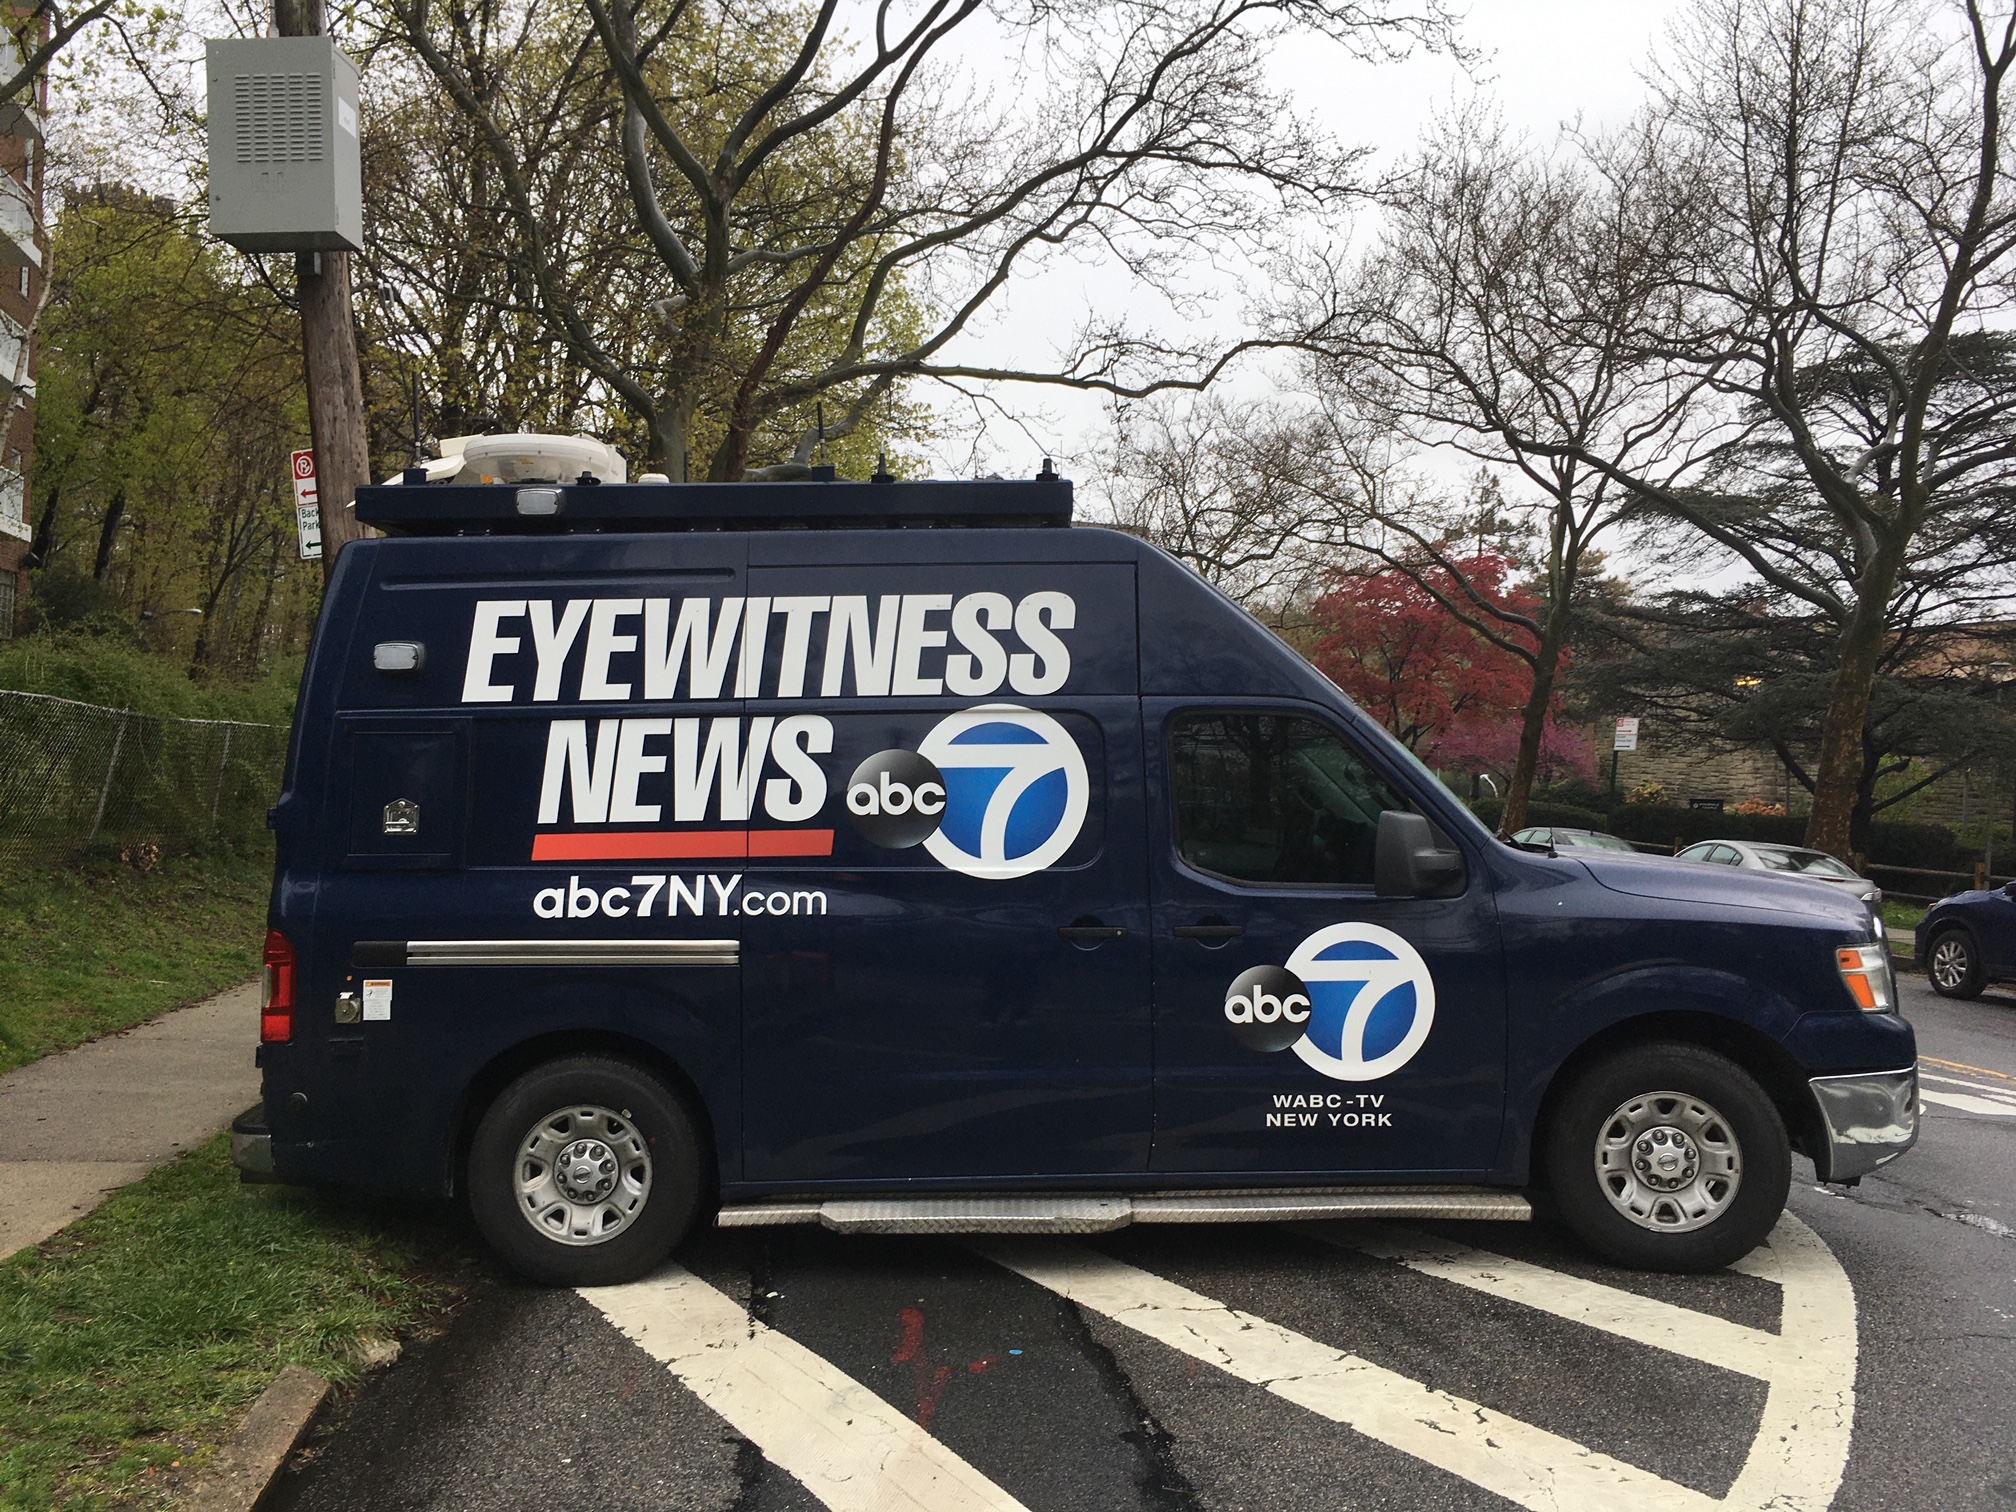 BUSTED! 'Eyewitness News' Driver Breaks Law in ABC7-TV Truck - Streetsblog  New York City